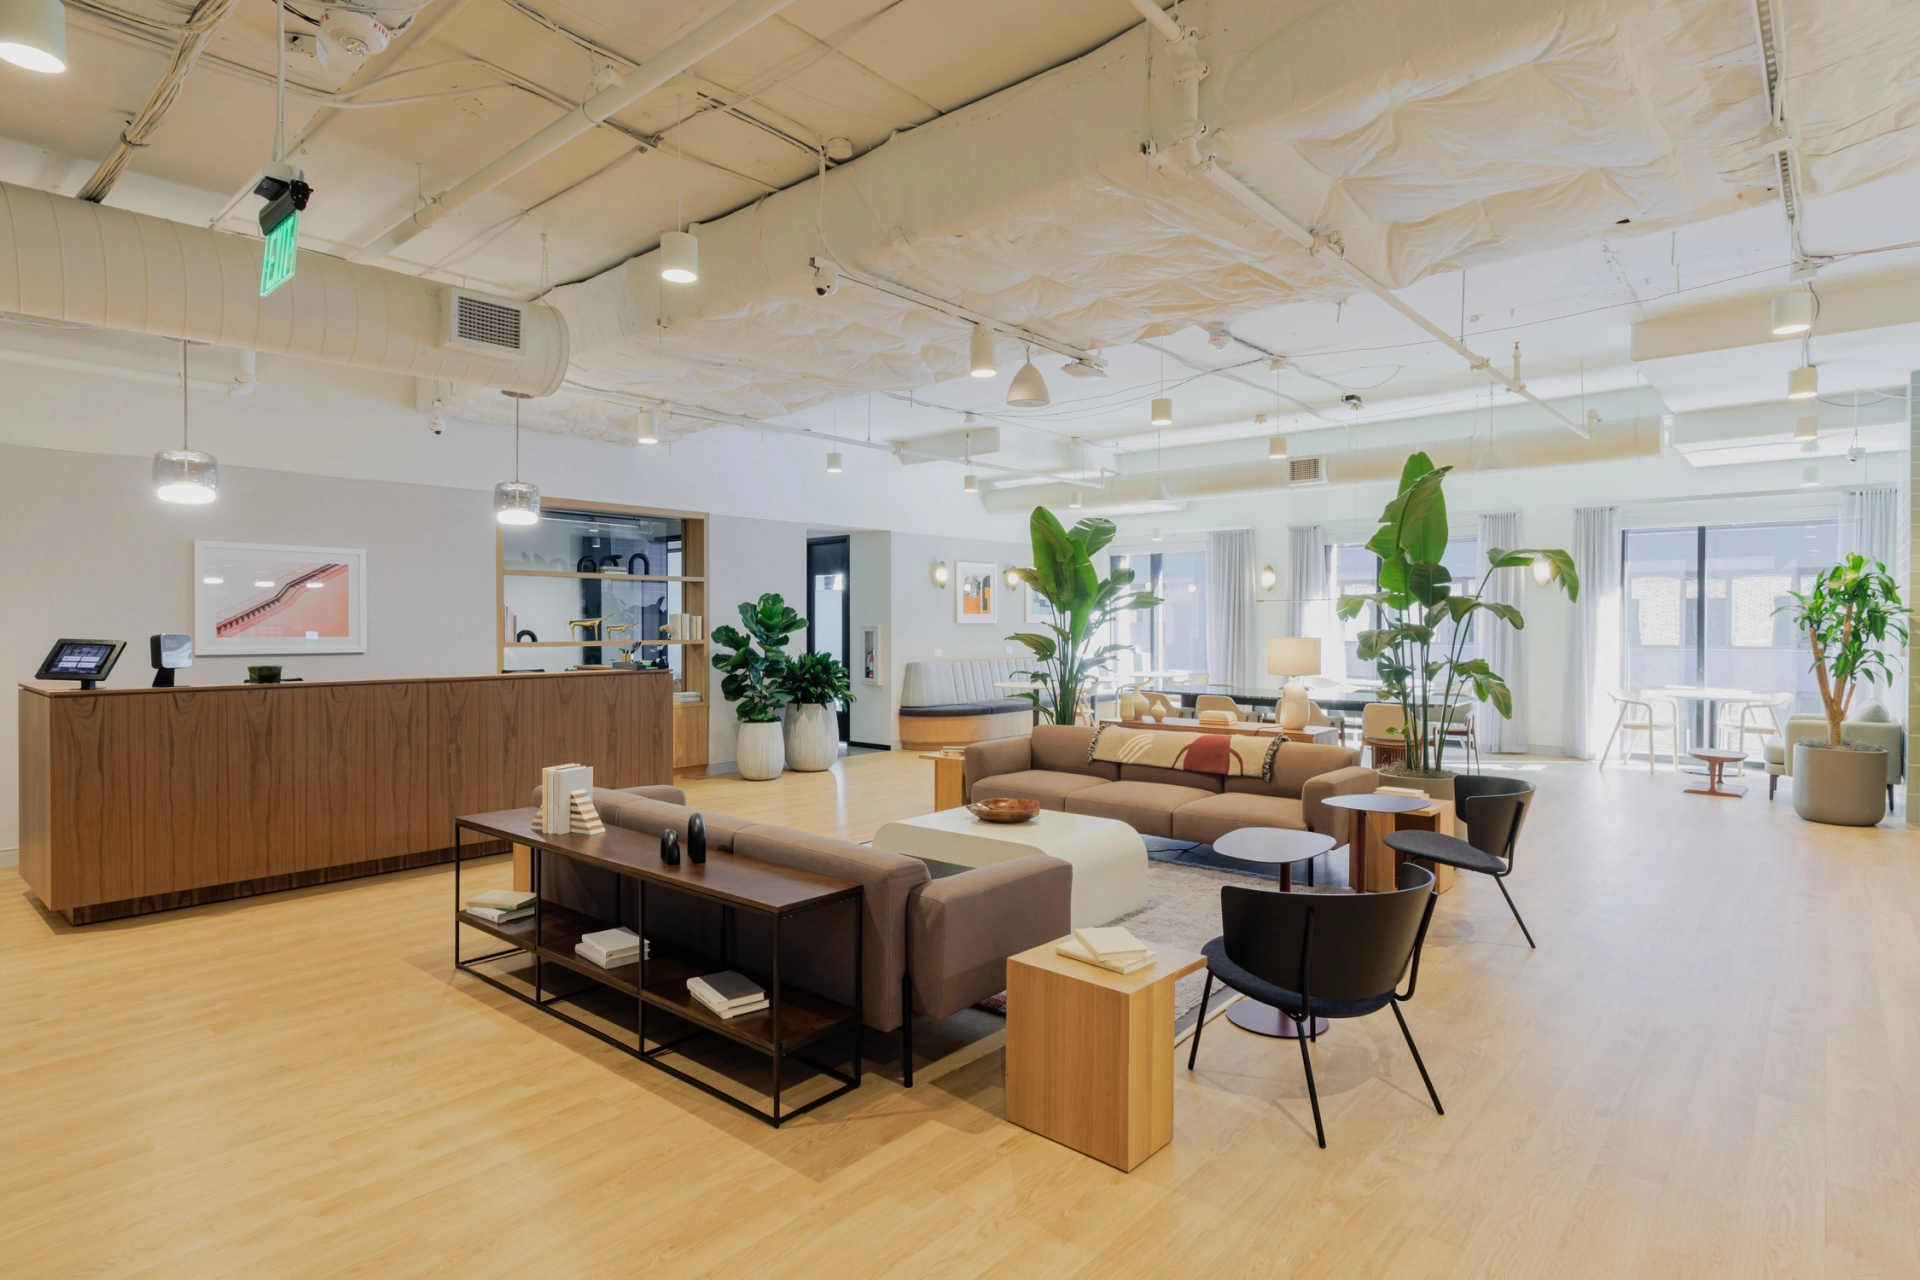 a modern coworking space with wooden floors and plants.